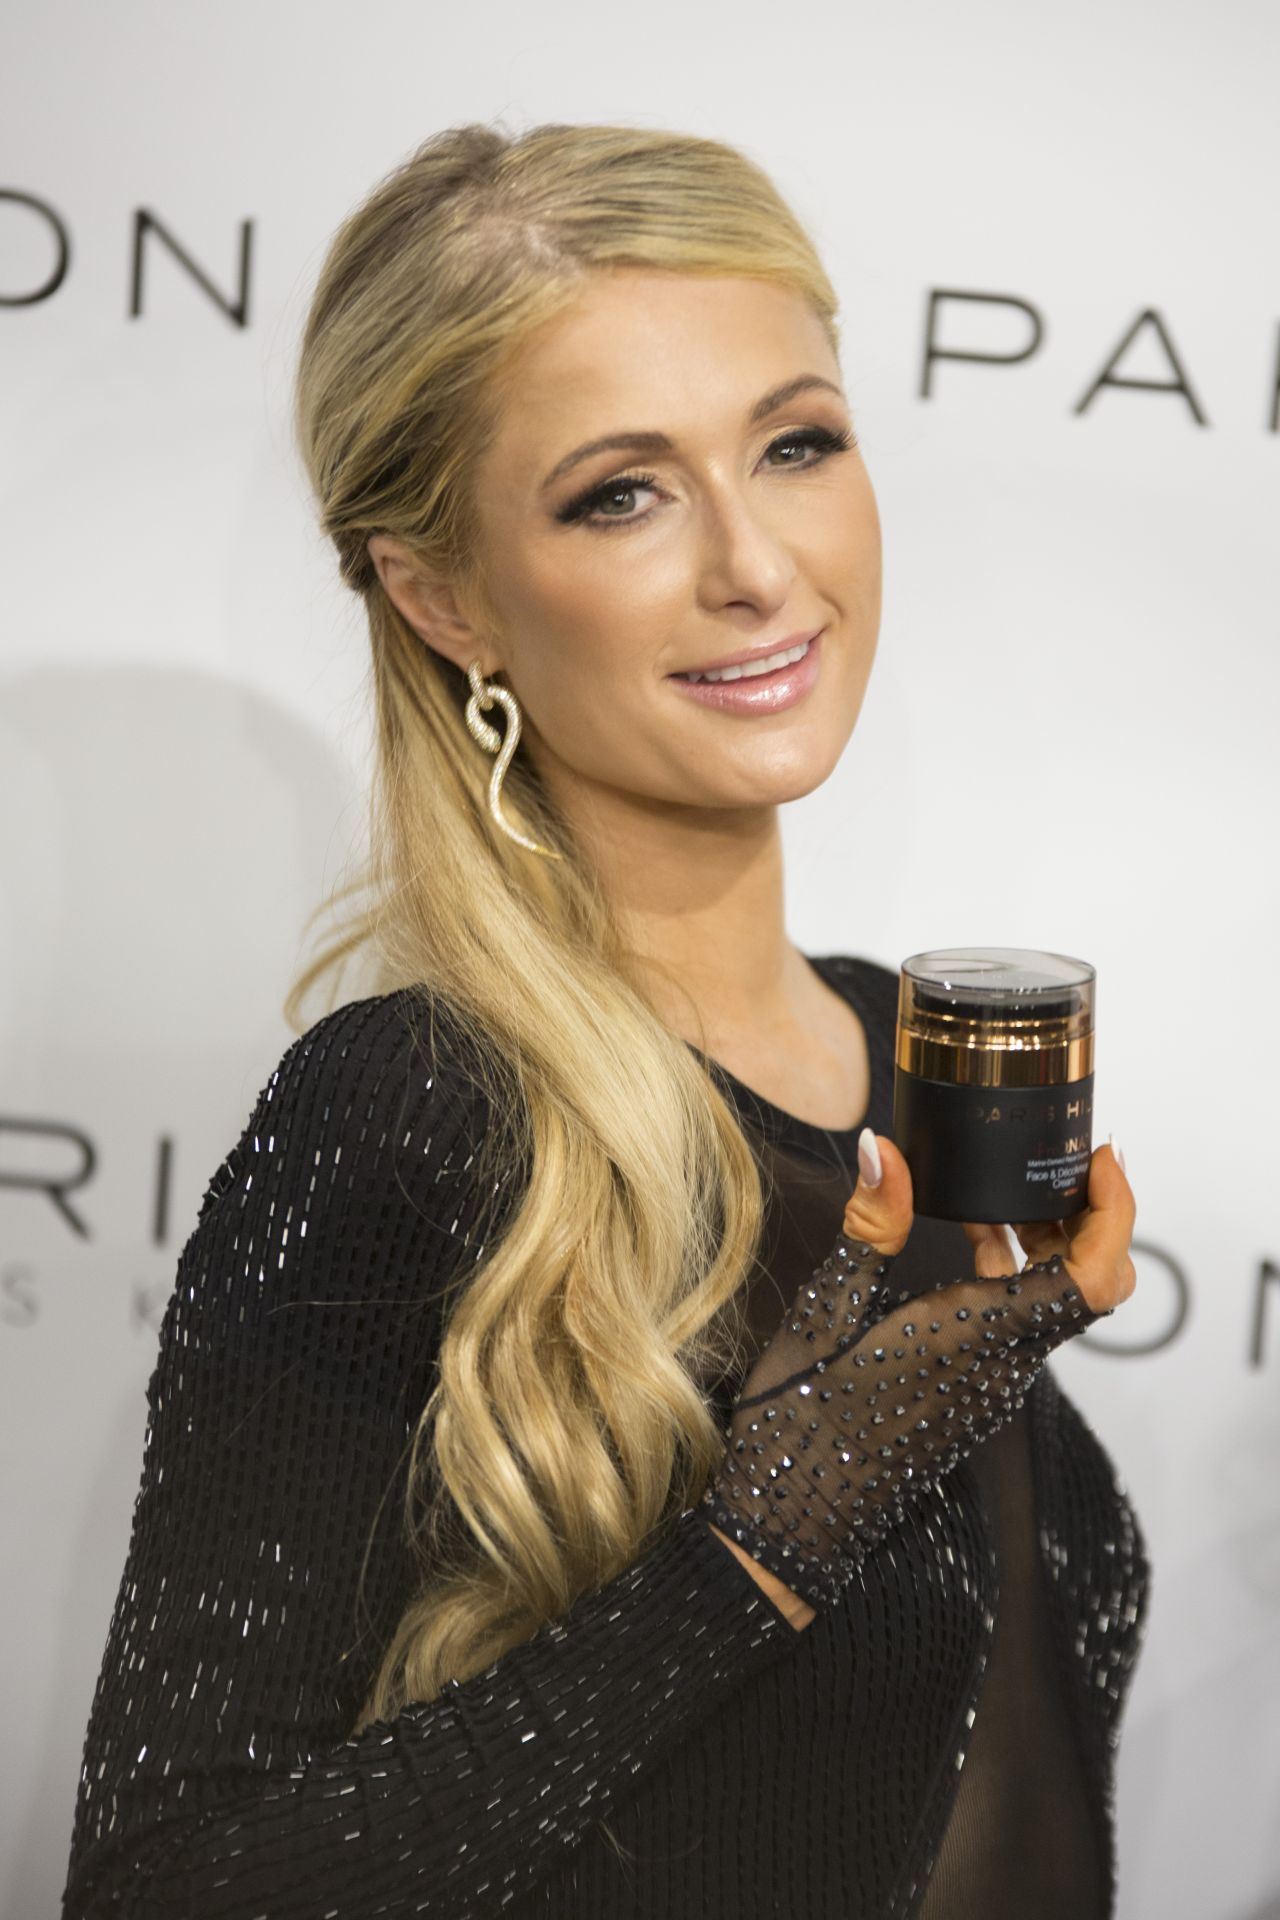 paris-hilton-hosts-the-prod.n.a-skincare-launch-party-at-rinascente-in-milan-2.jpg